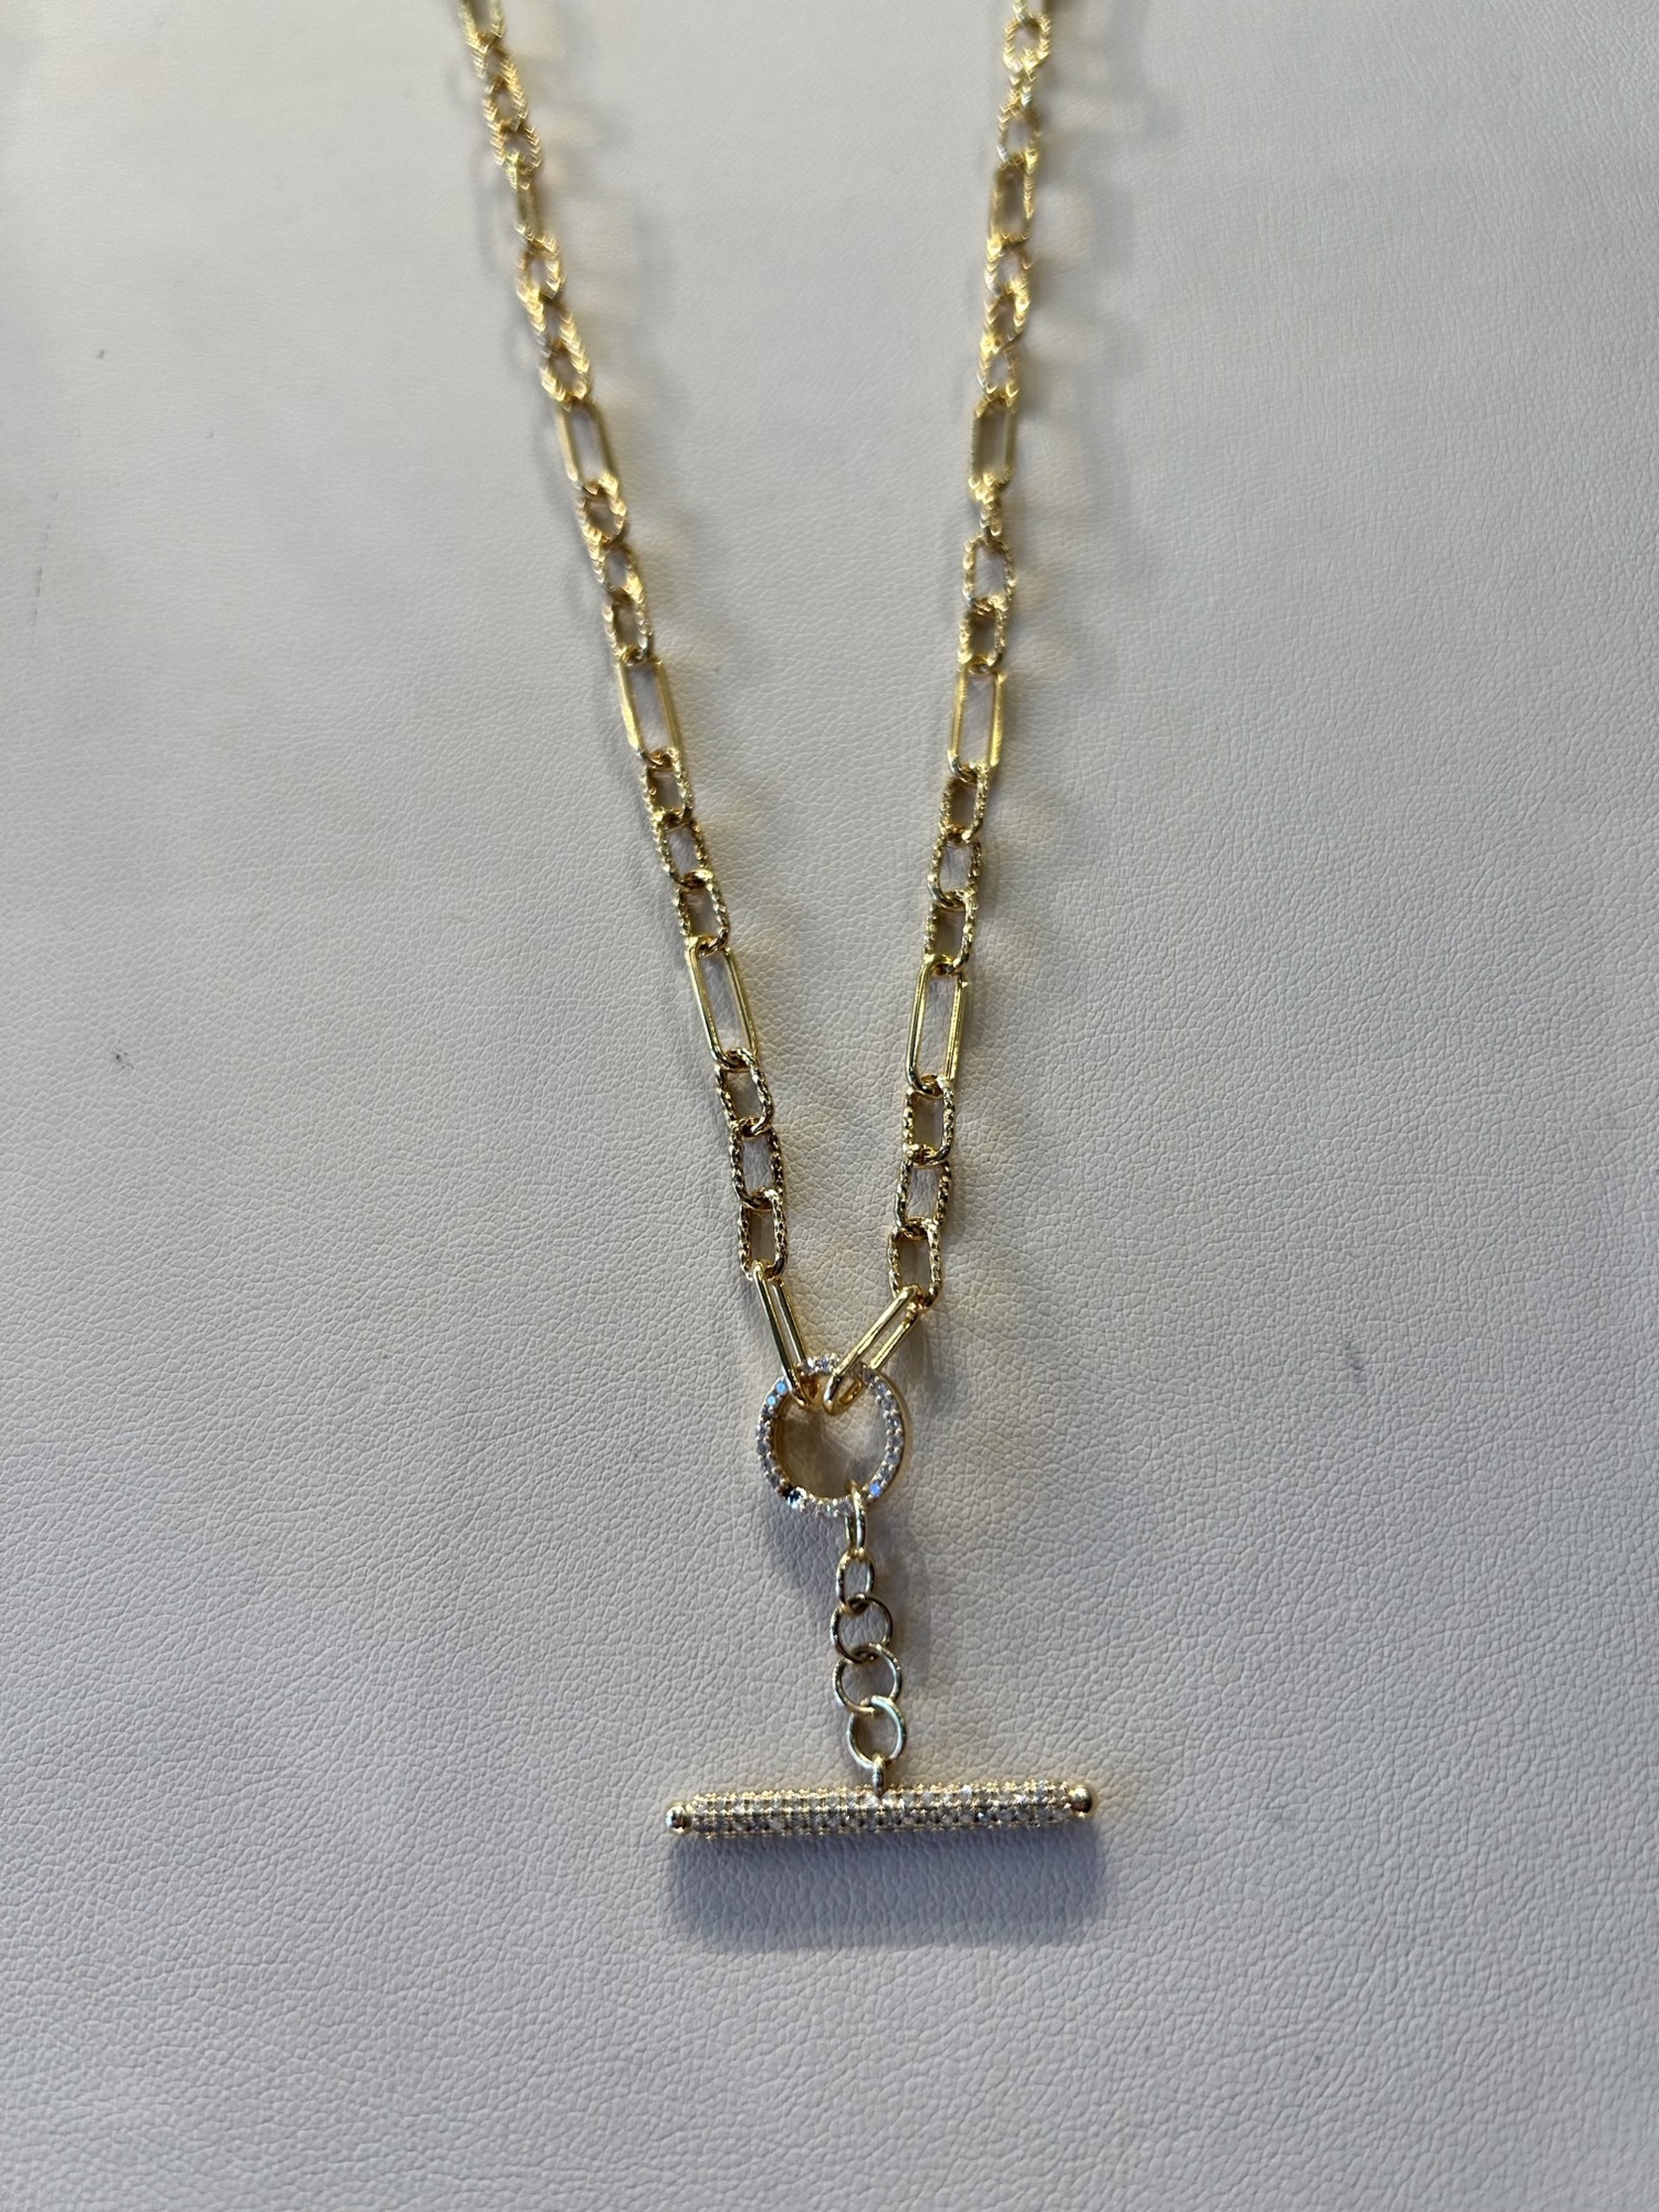 KB-N30 14k gold necklace with small diamond cut links and large smooth links and a circle diamond clasp by Karen Birchmier